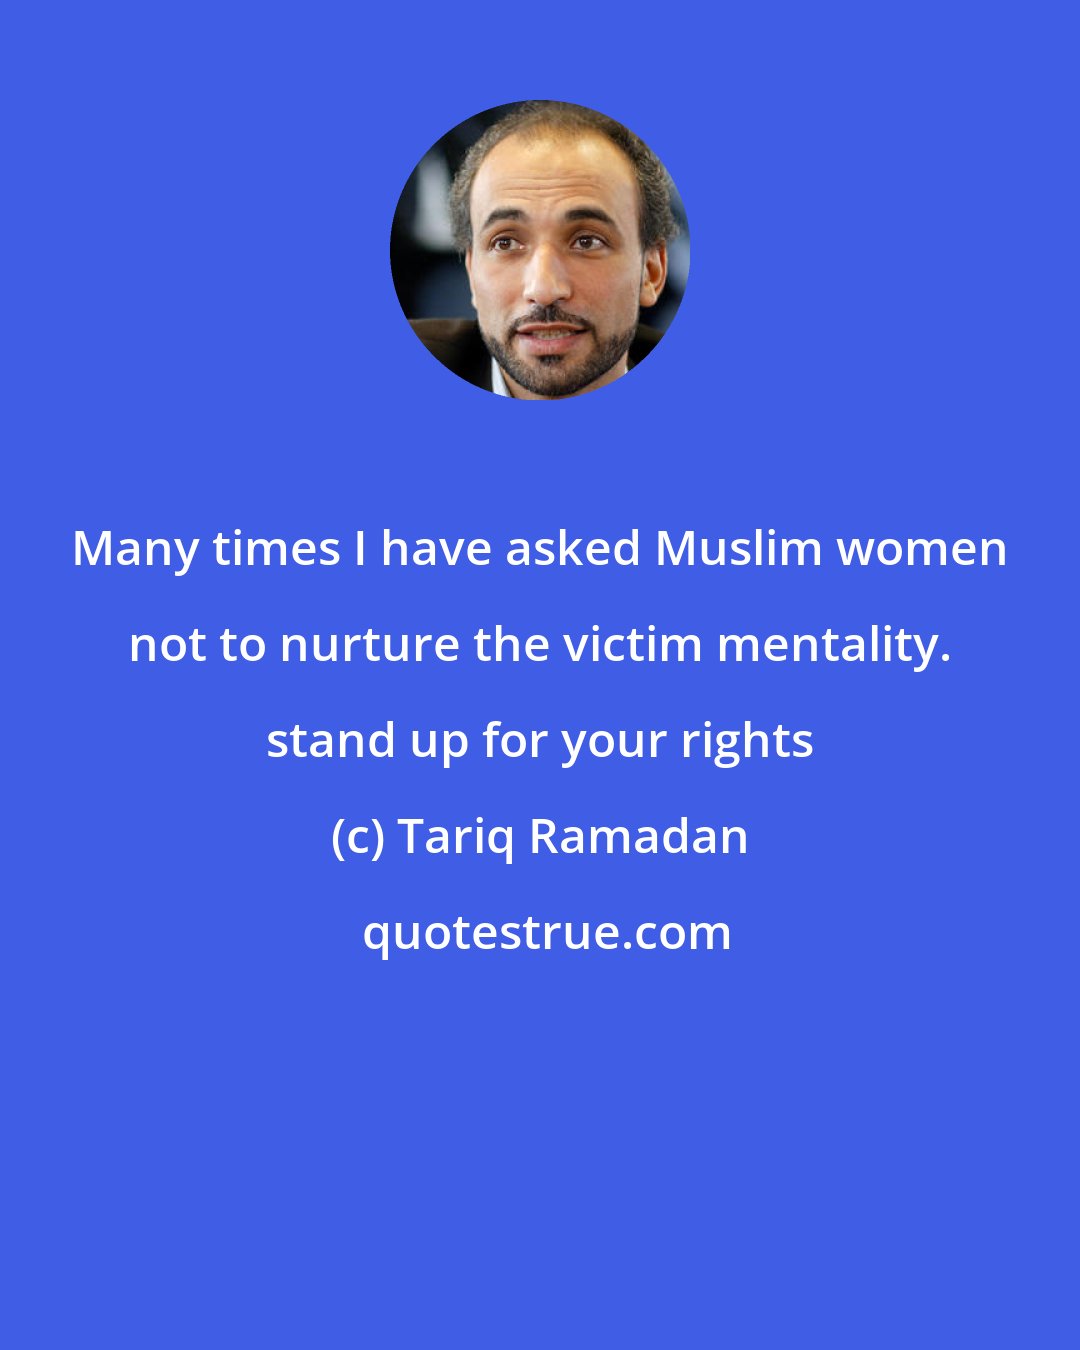 Tariq Ramadan: Many times I have asked Muslim women not to nurture the victim mentality. stand up for your rights